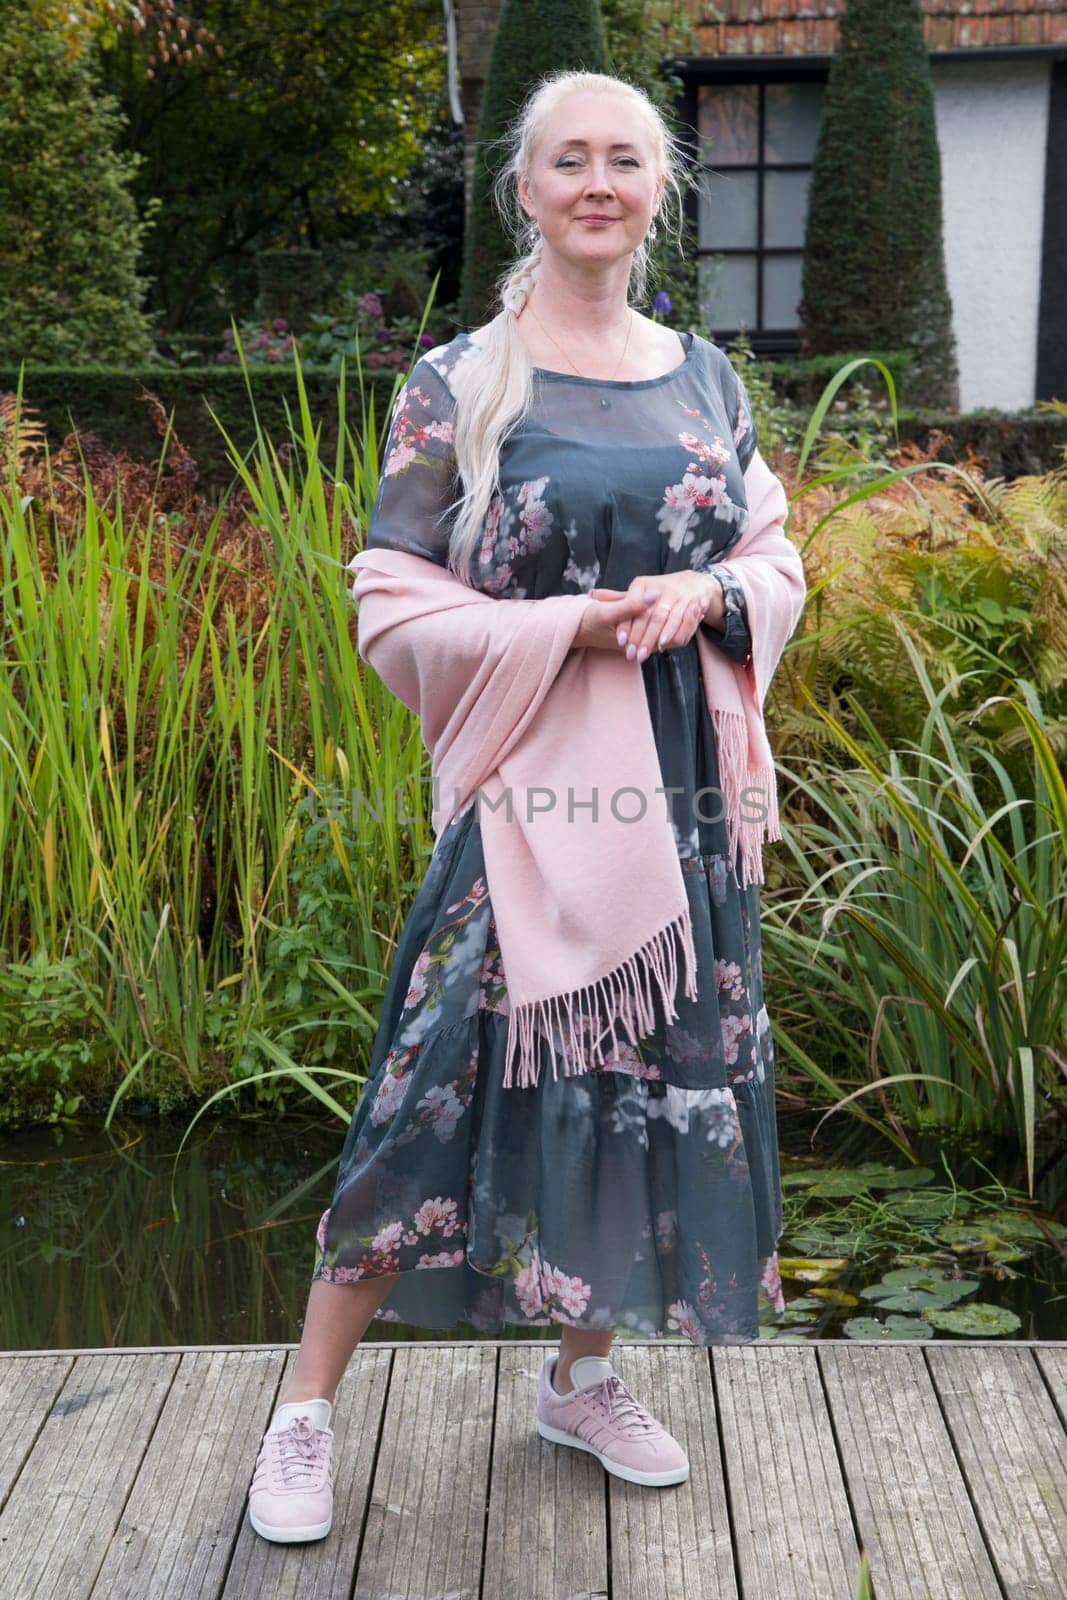 young beautiful woman in a long dress with a floral print and a pink shawl Fashionable style for spring and autumn demi-season clothing. High quality photo